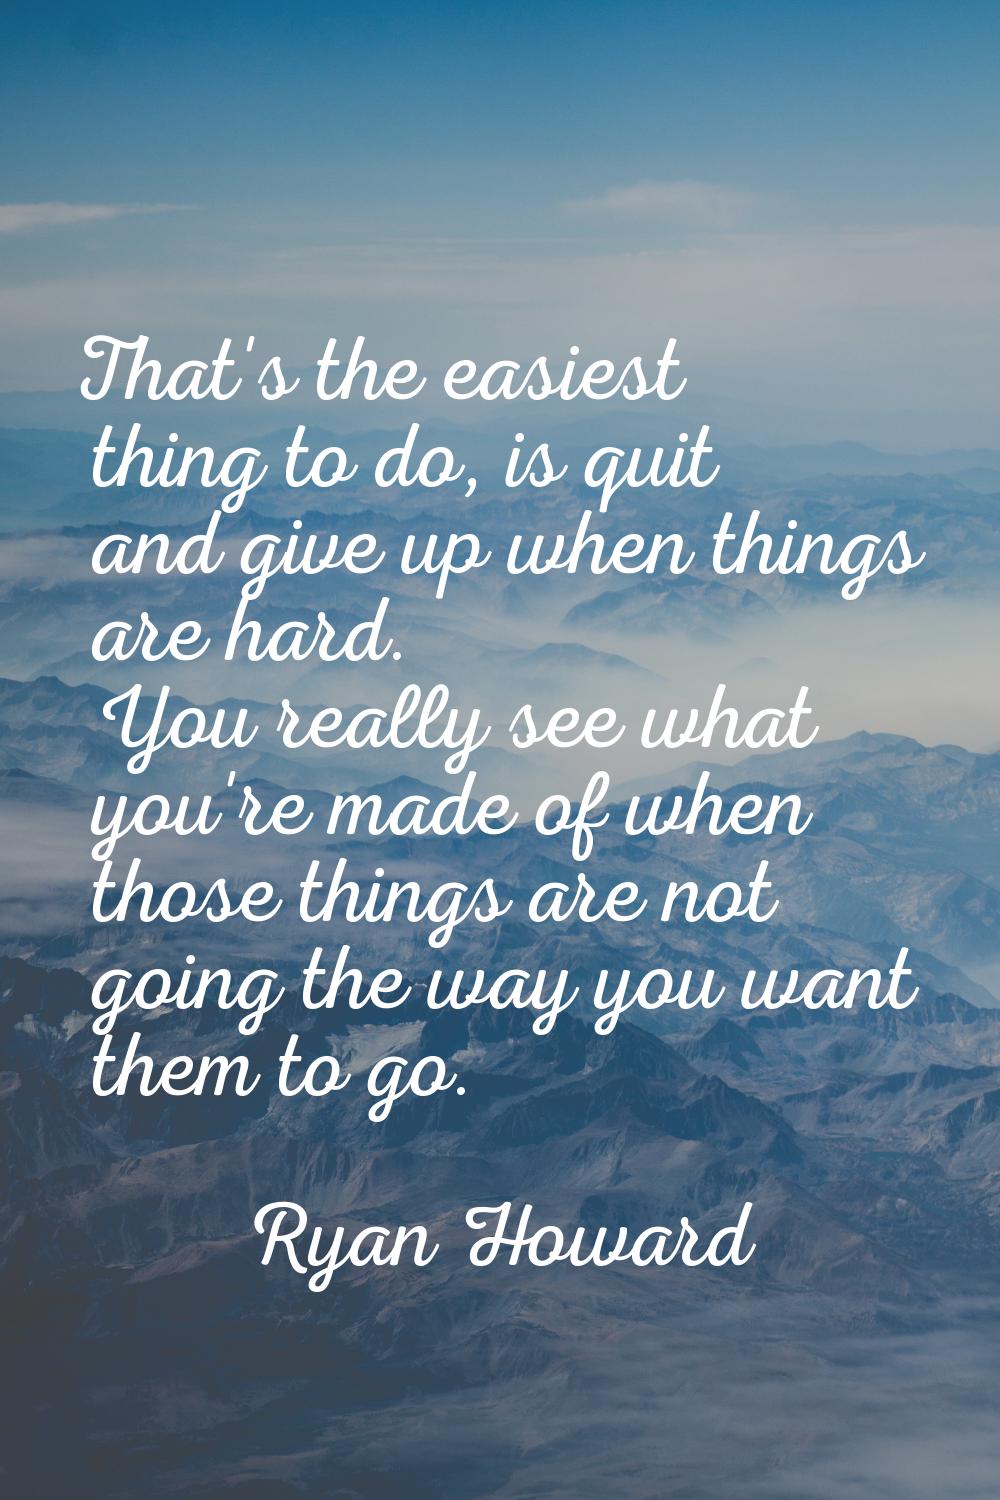 That's the easiest thing to do, is quit and give up when things are hard. You really see what you'r